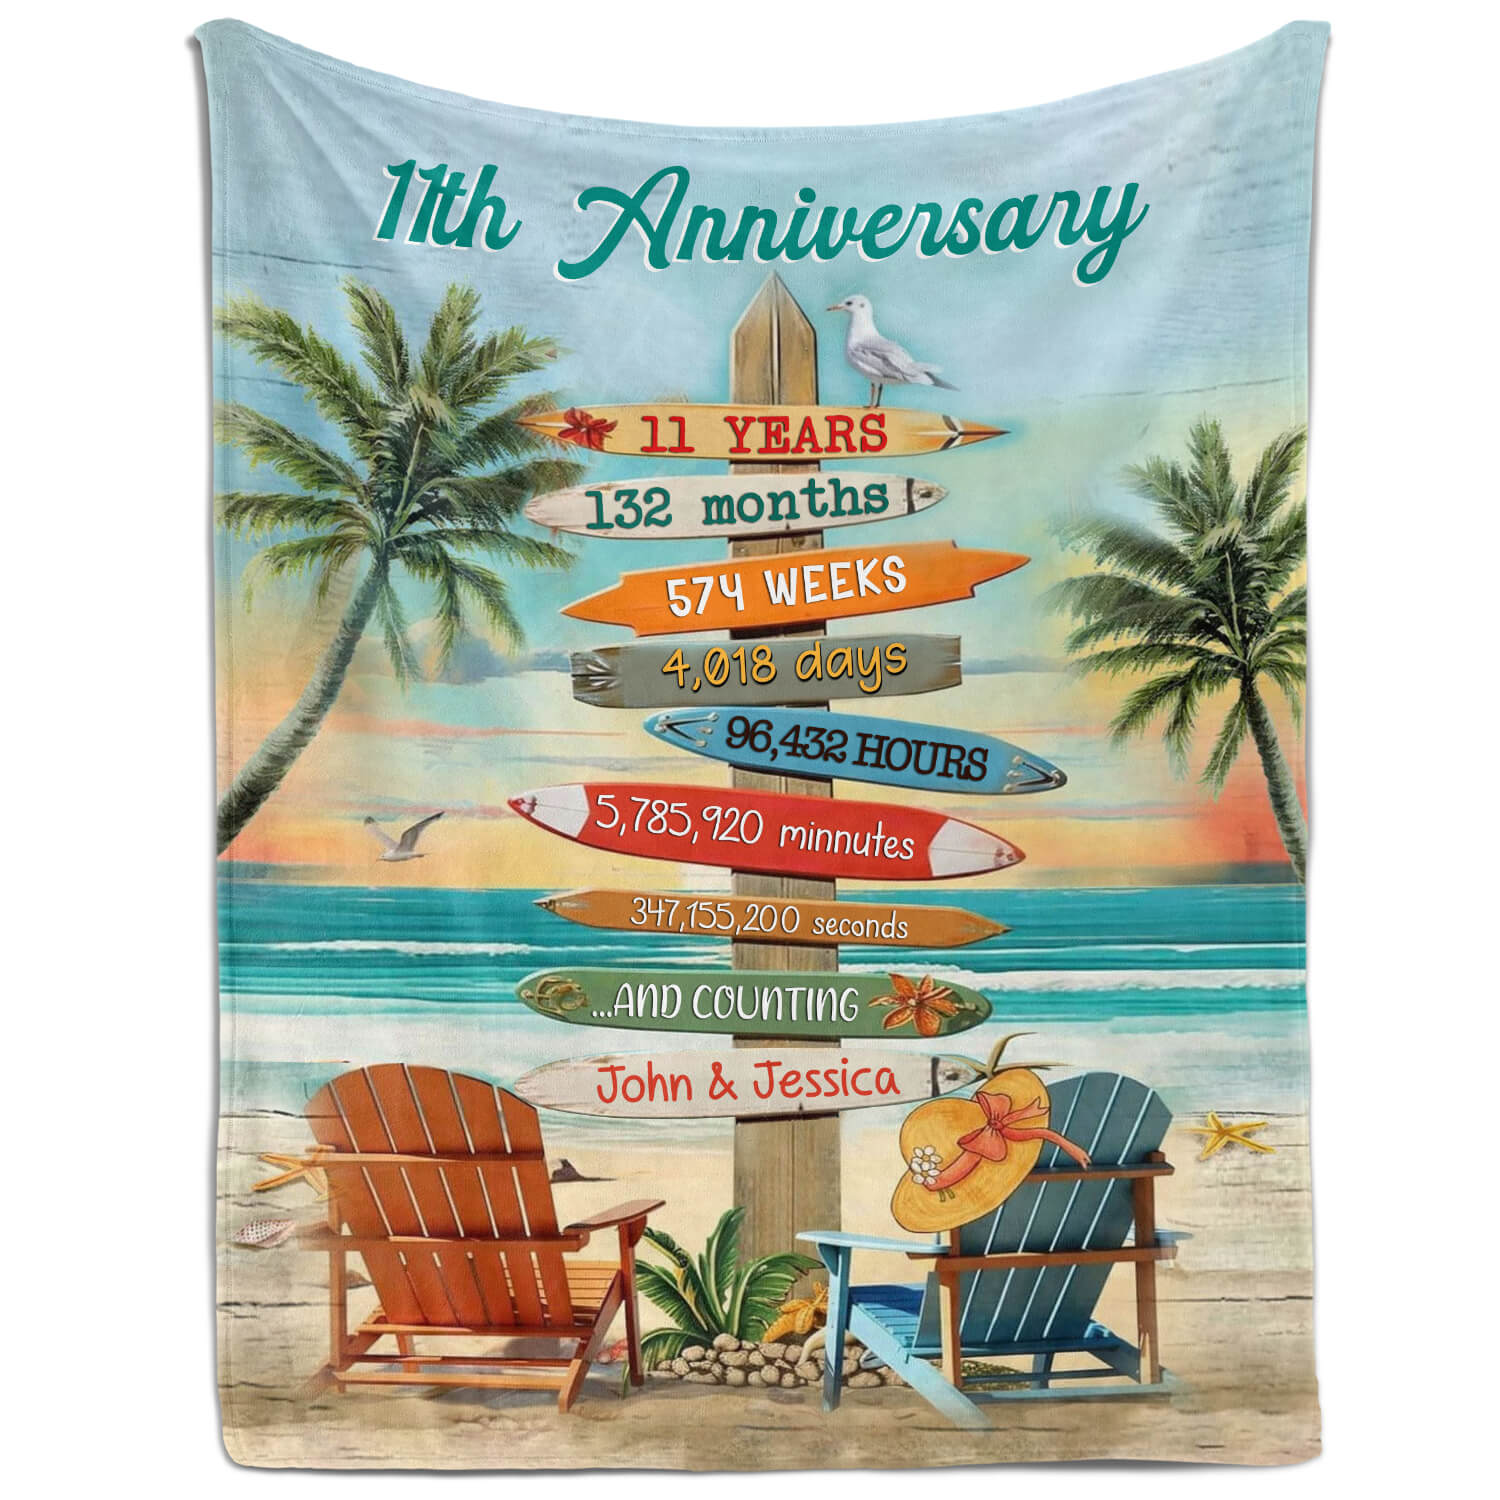 11 Years - Personalized 11 Year Anniversary gift For Husband or Wife - Custom Blanket - MyMindfulGifts